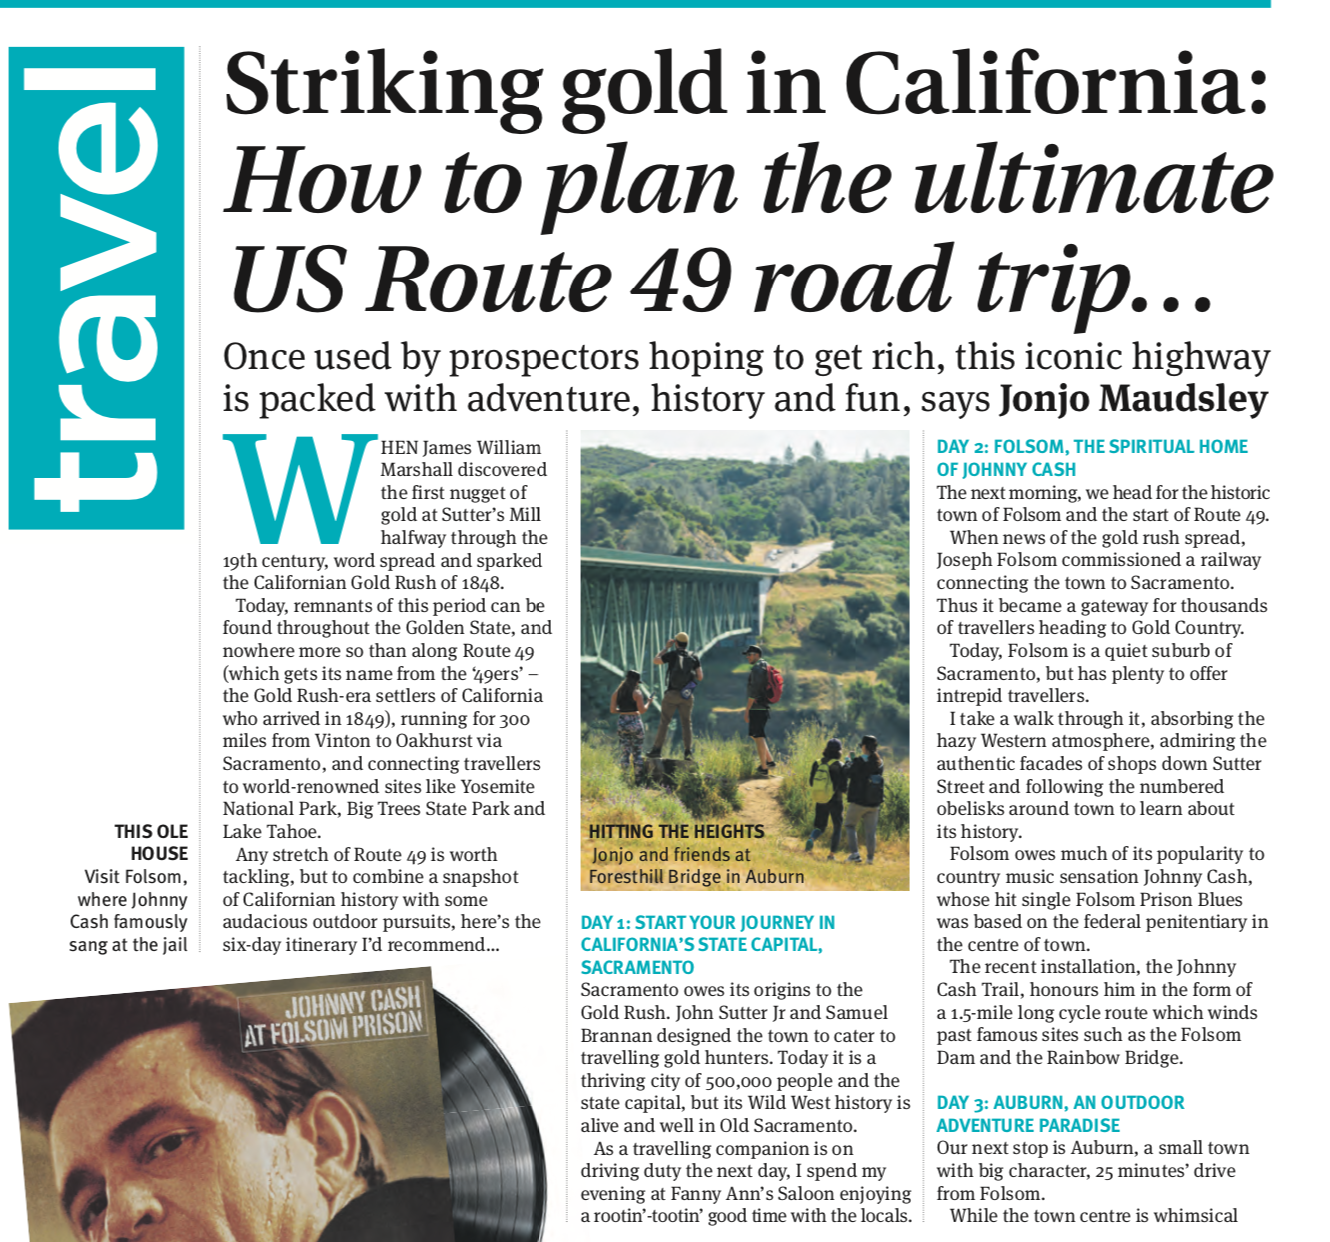 Travel guide to California's Route 49 for Times of Tunbridge Wells